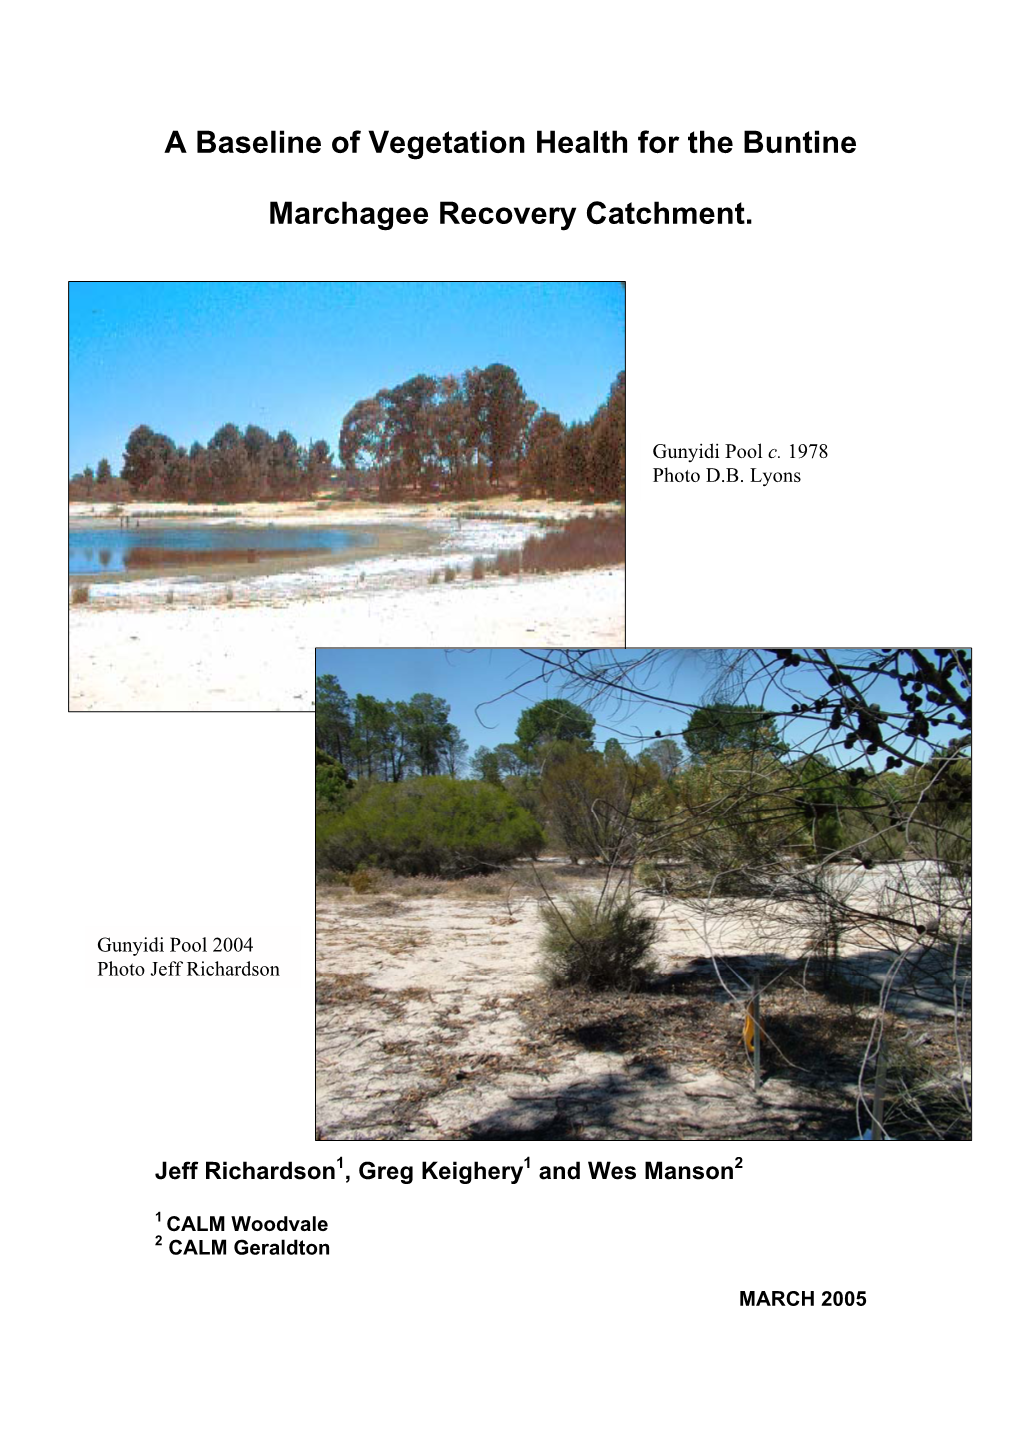 A Baseline of Vegetation Health for the Buntine Marchagee Recovery